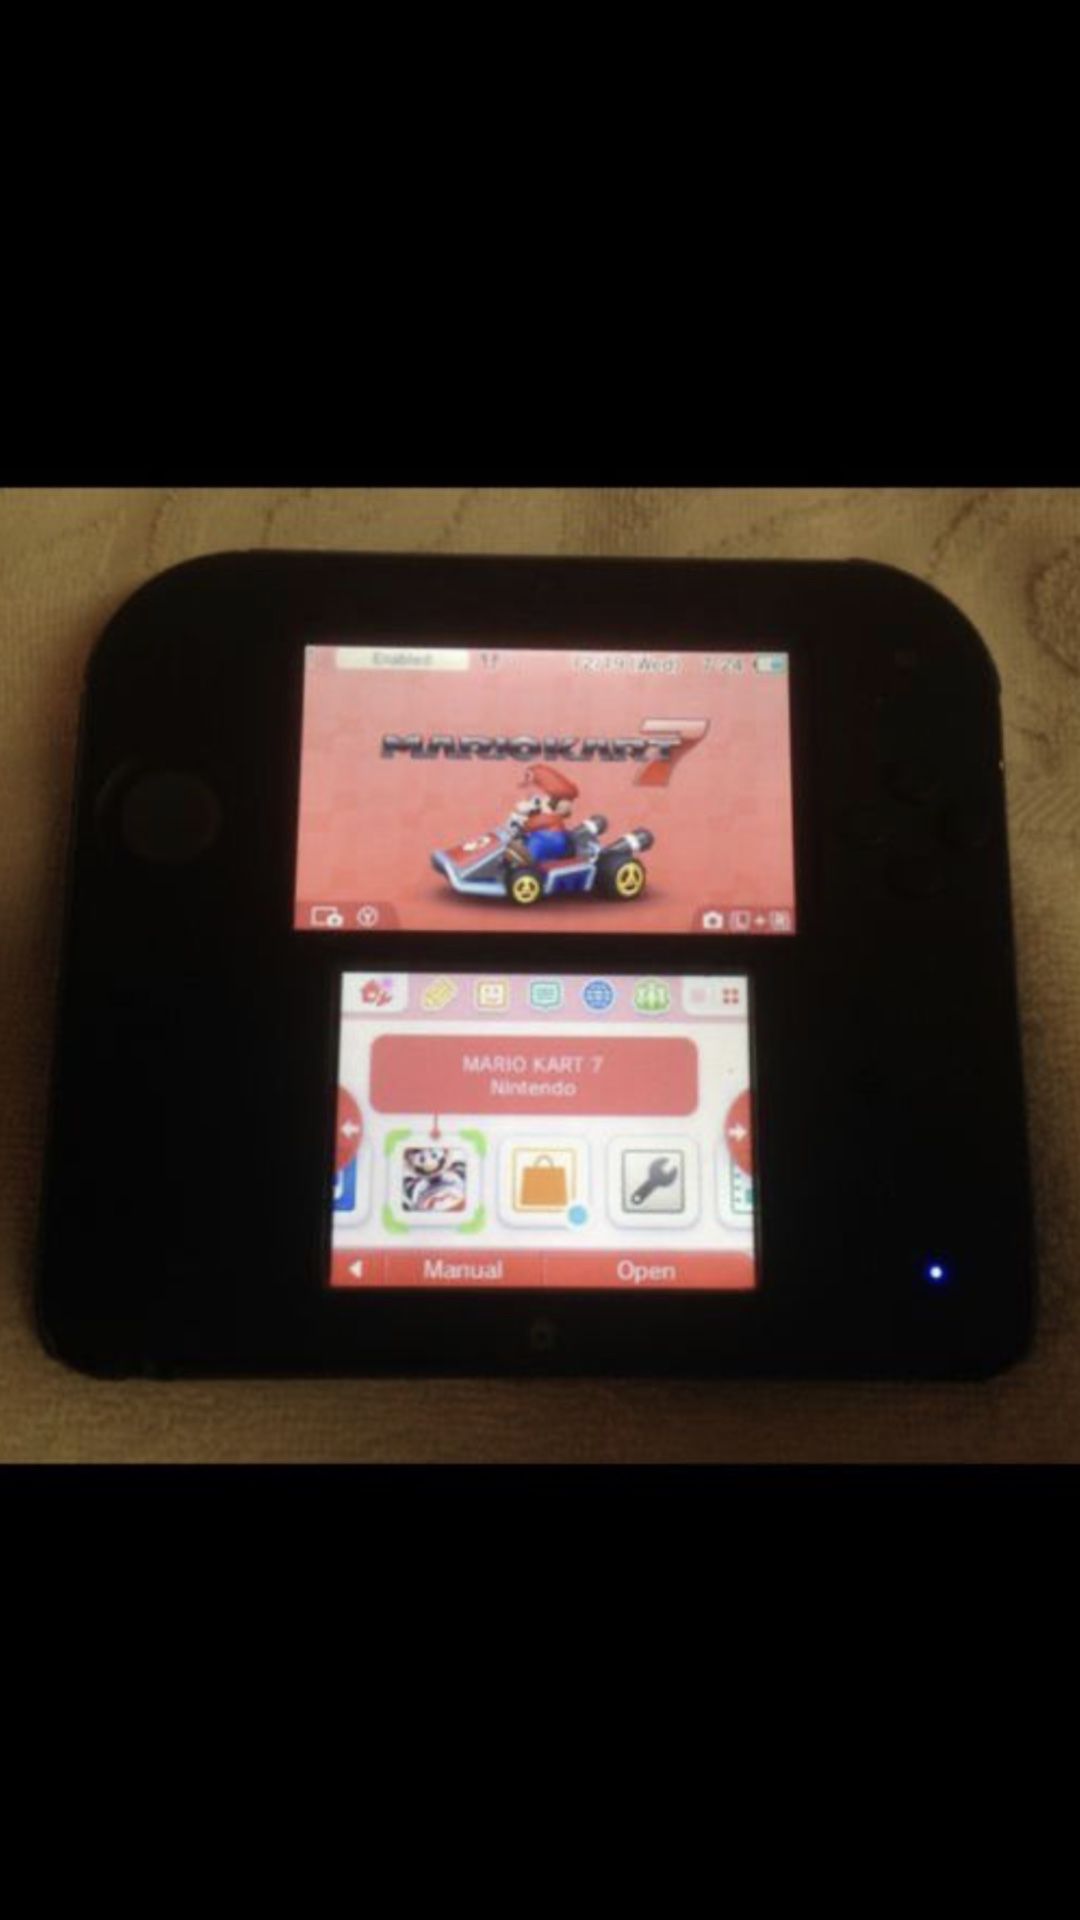 Nintendo 2ds with Mario Kart 7 plays ds & 3ds games also includes Charger & Case